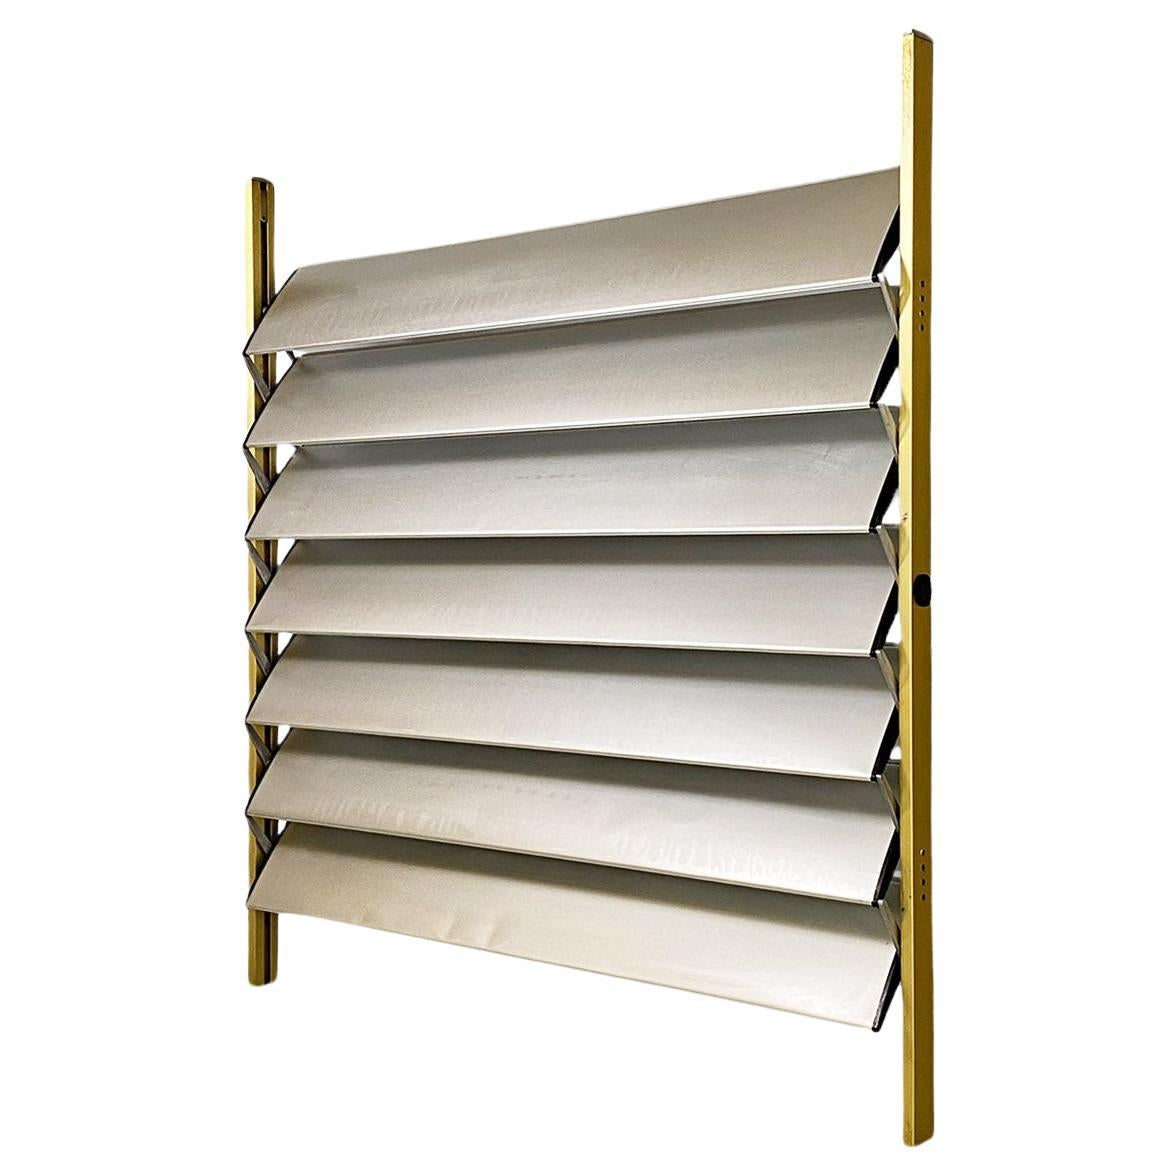  French industrial brise-soleil aluminium panel by Jean Prouvè, 1956 For Sale